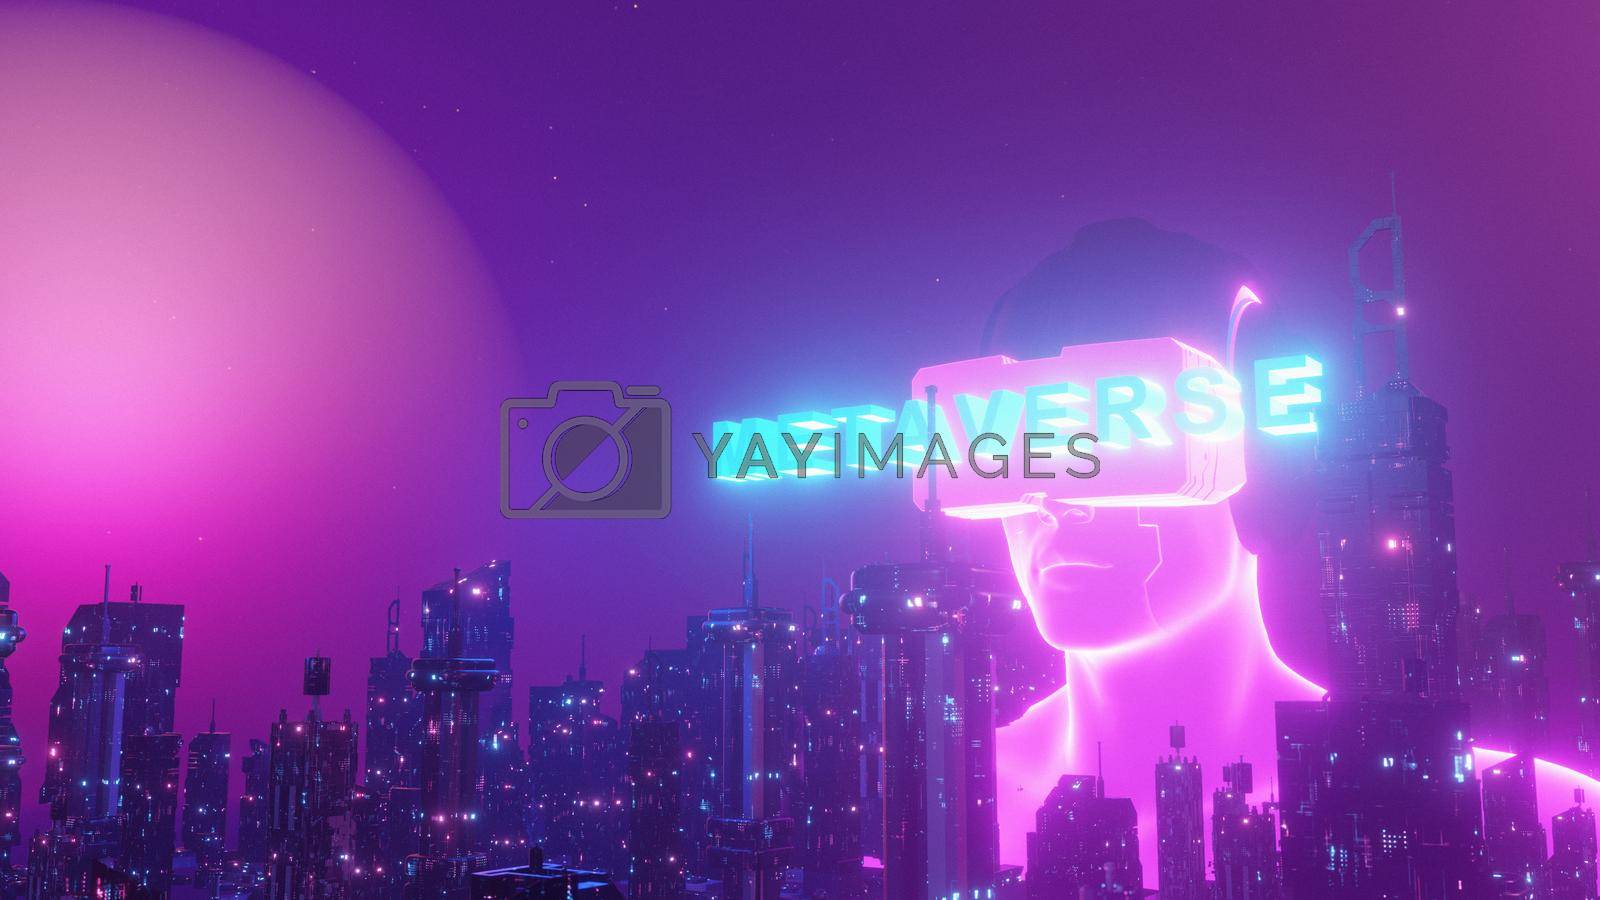 Royalty free image of Metaverse VR Virtual Reality Cyber City World Virtual Reality Technology Concept Future Banner Background 3d Illustration by yay_lmrb